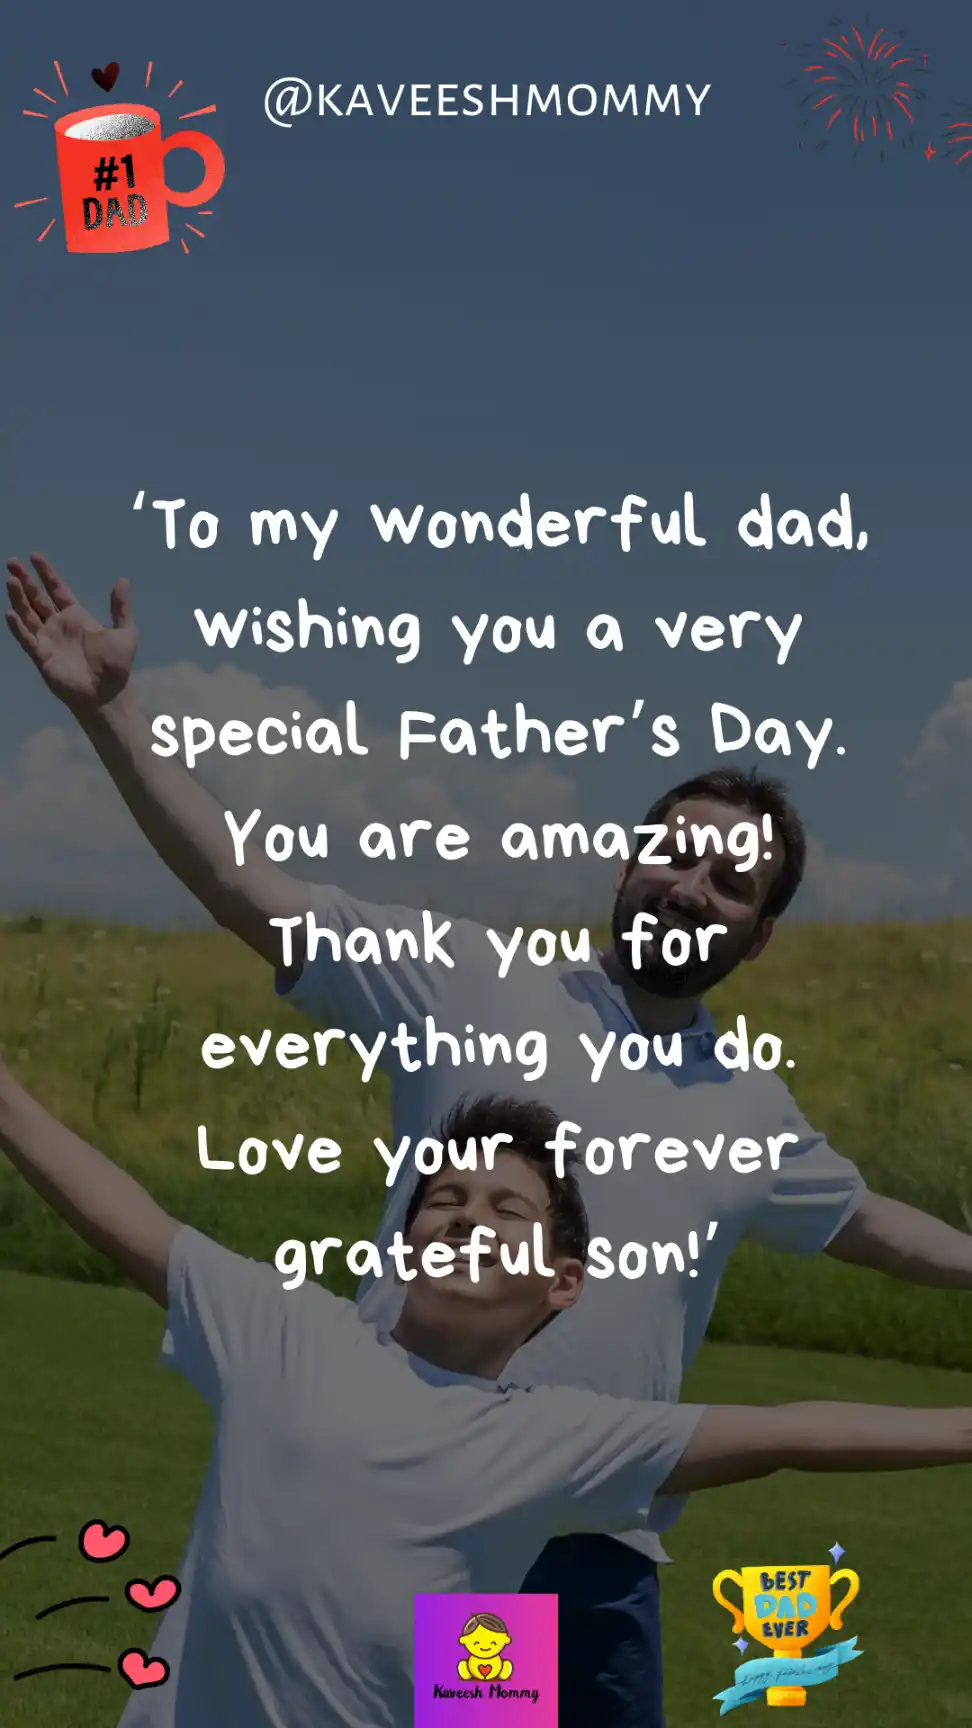 first father's day message from mother to son-‘To my wonderful dad, wishing you a very special Father’s Day. You are amazing! Thank you for everything you do. Love your forever grateful son!’